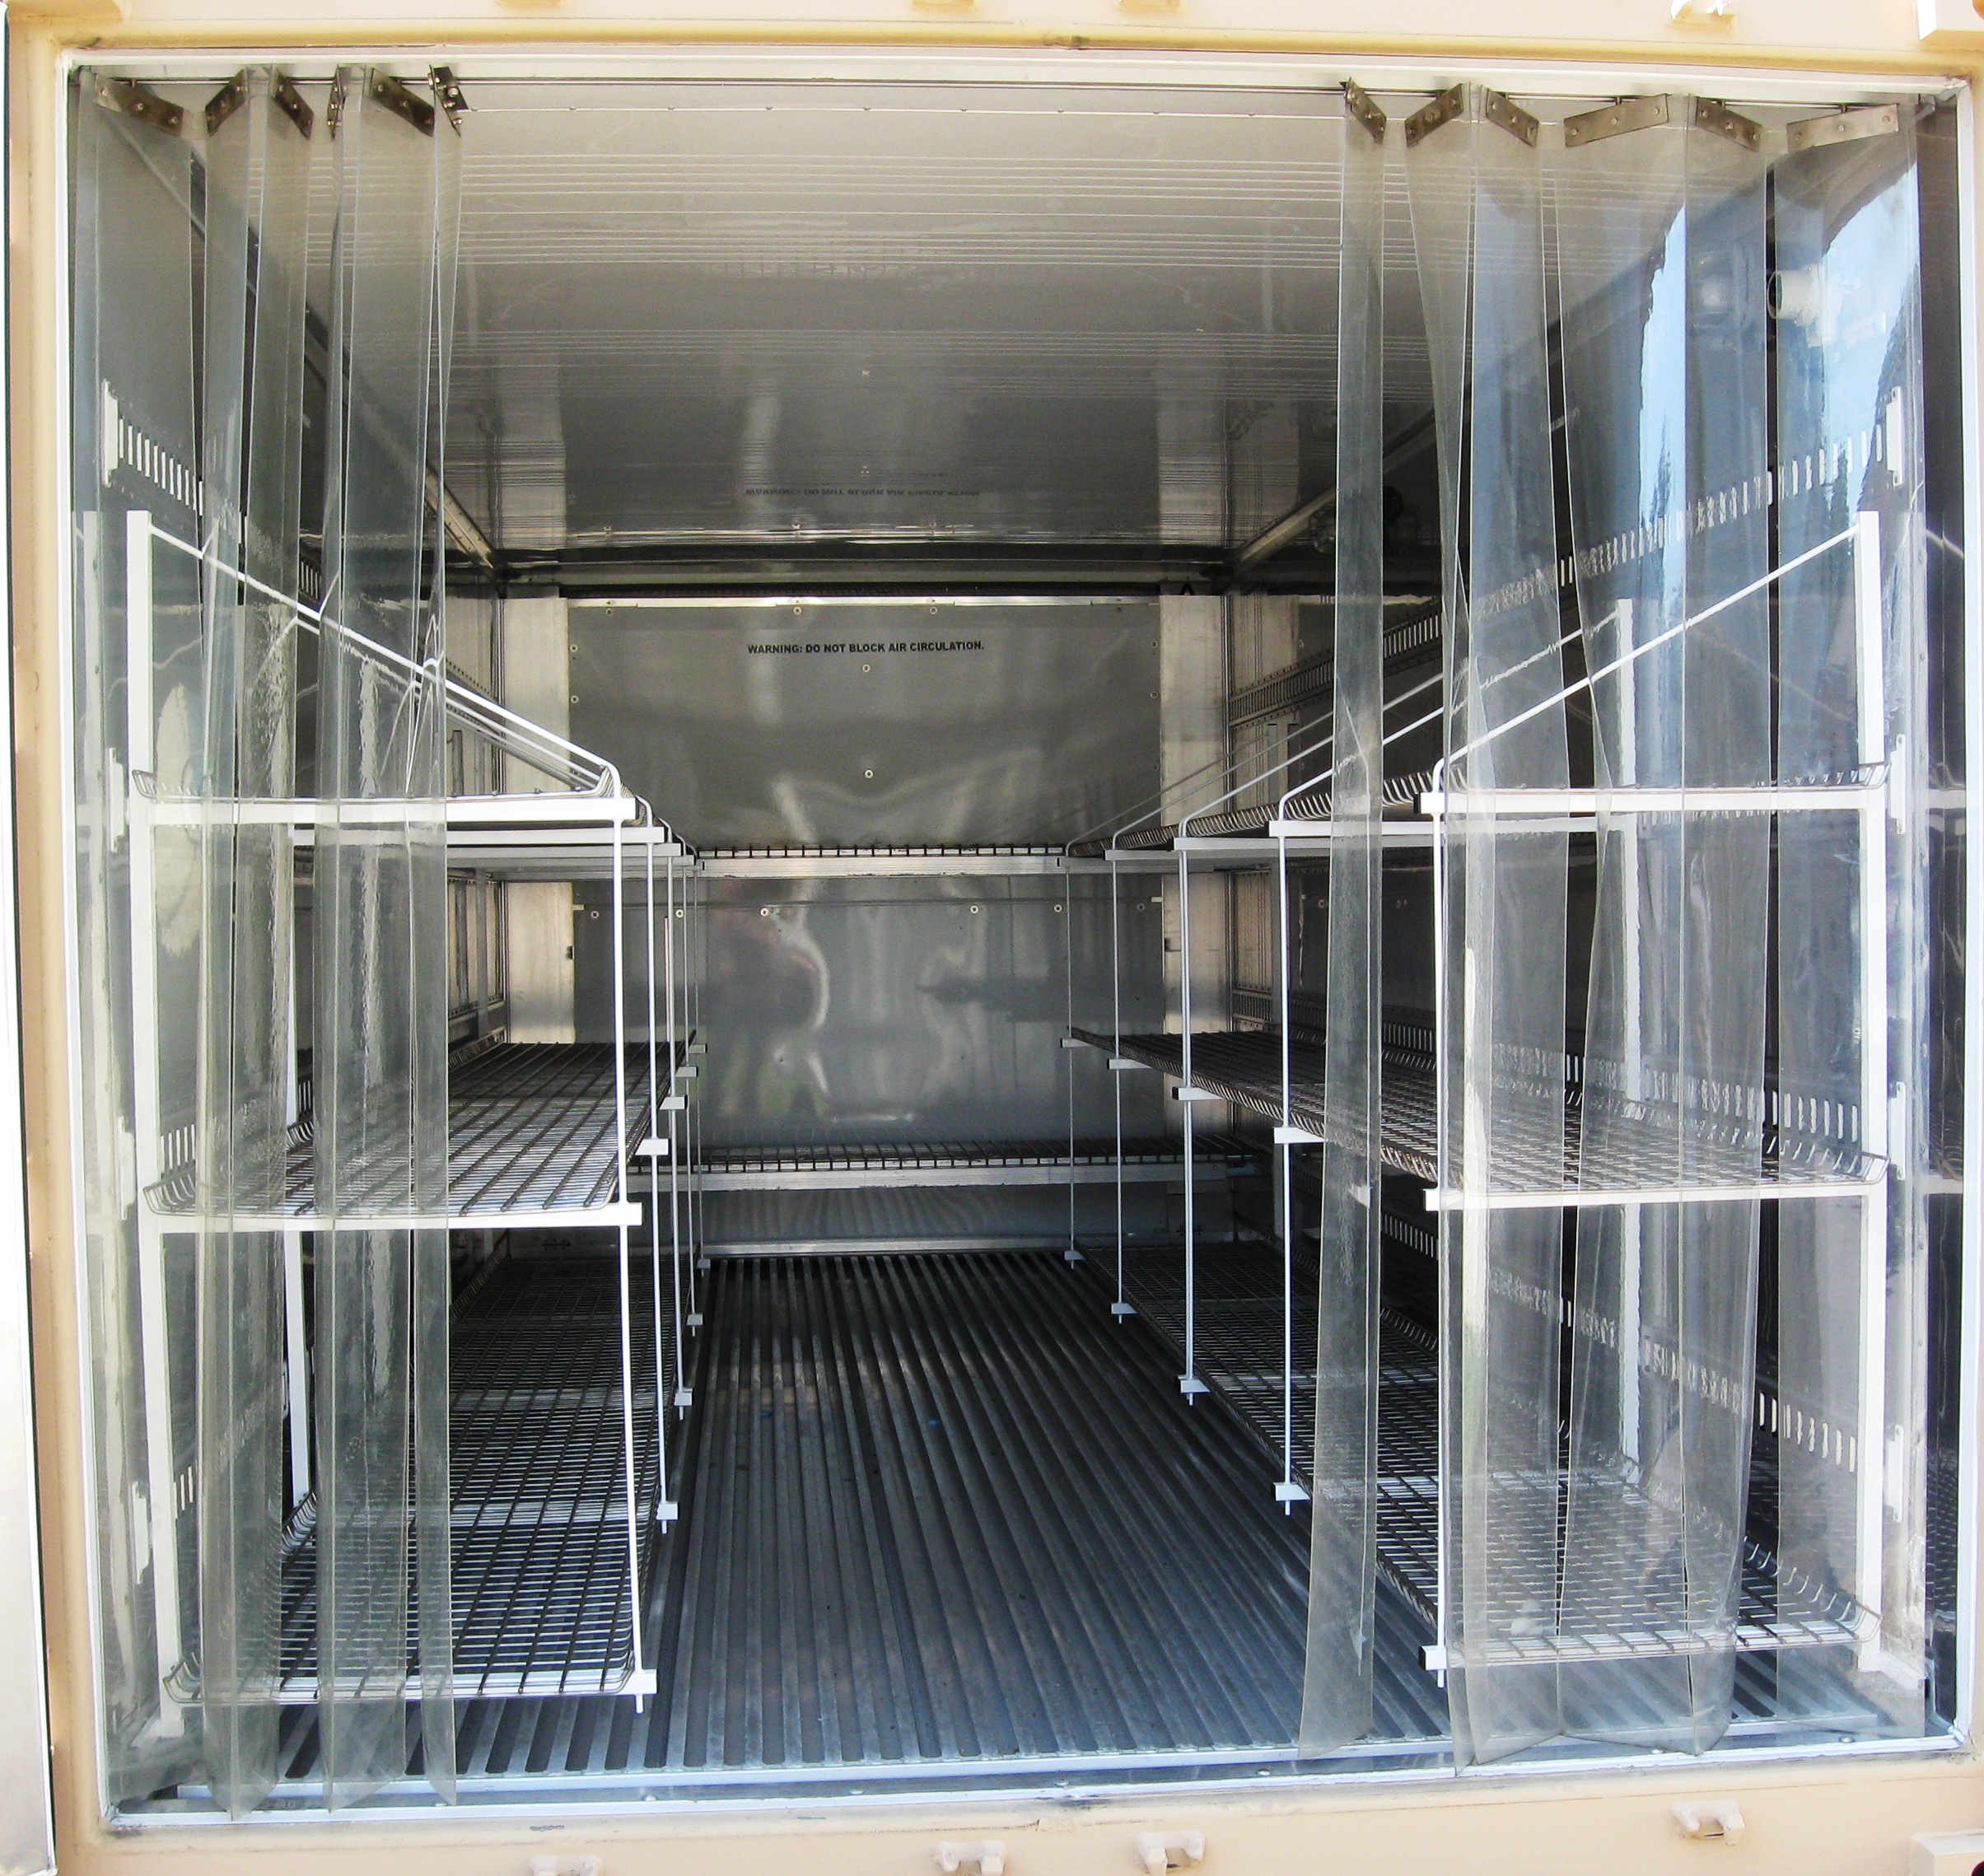 20ft High Cube Reefer Container interior